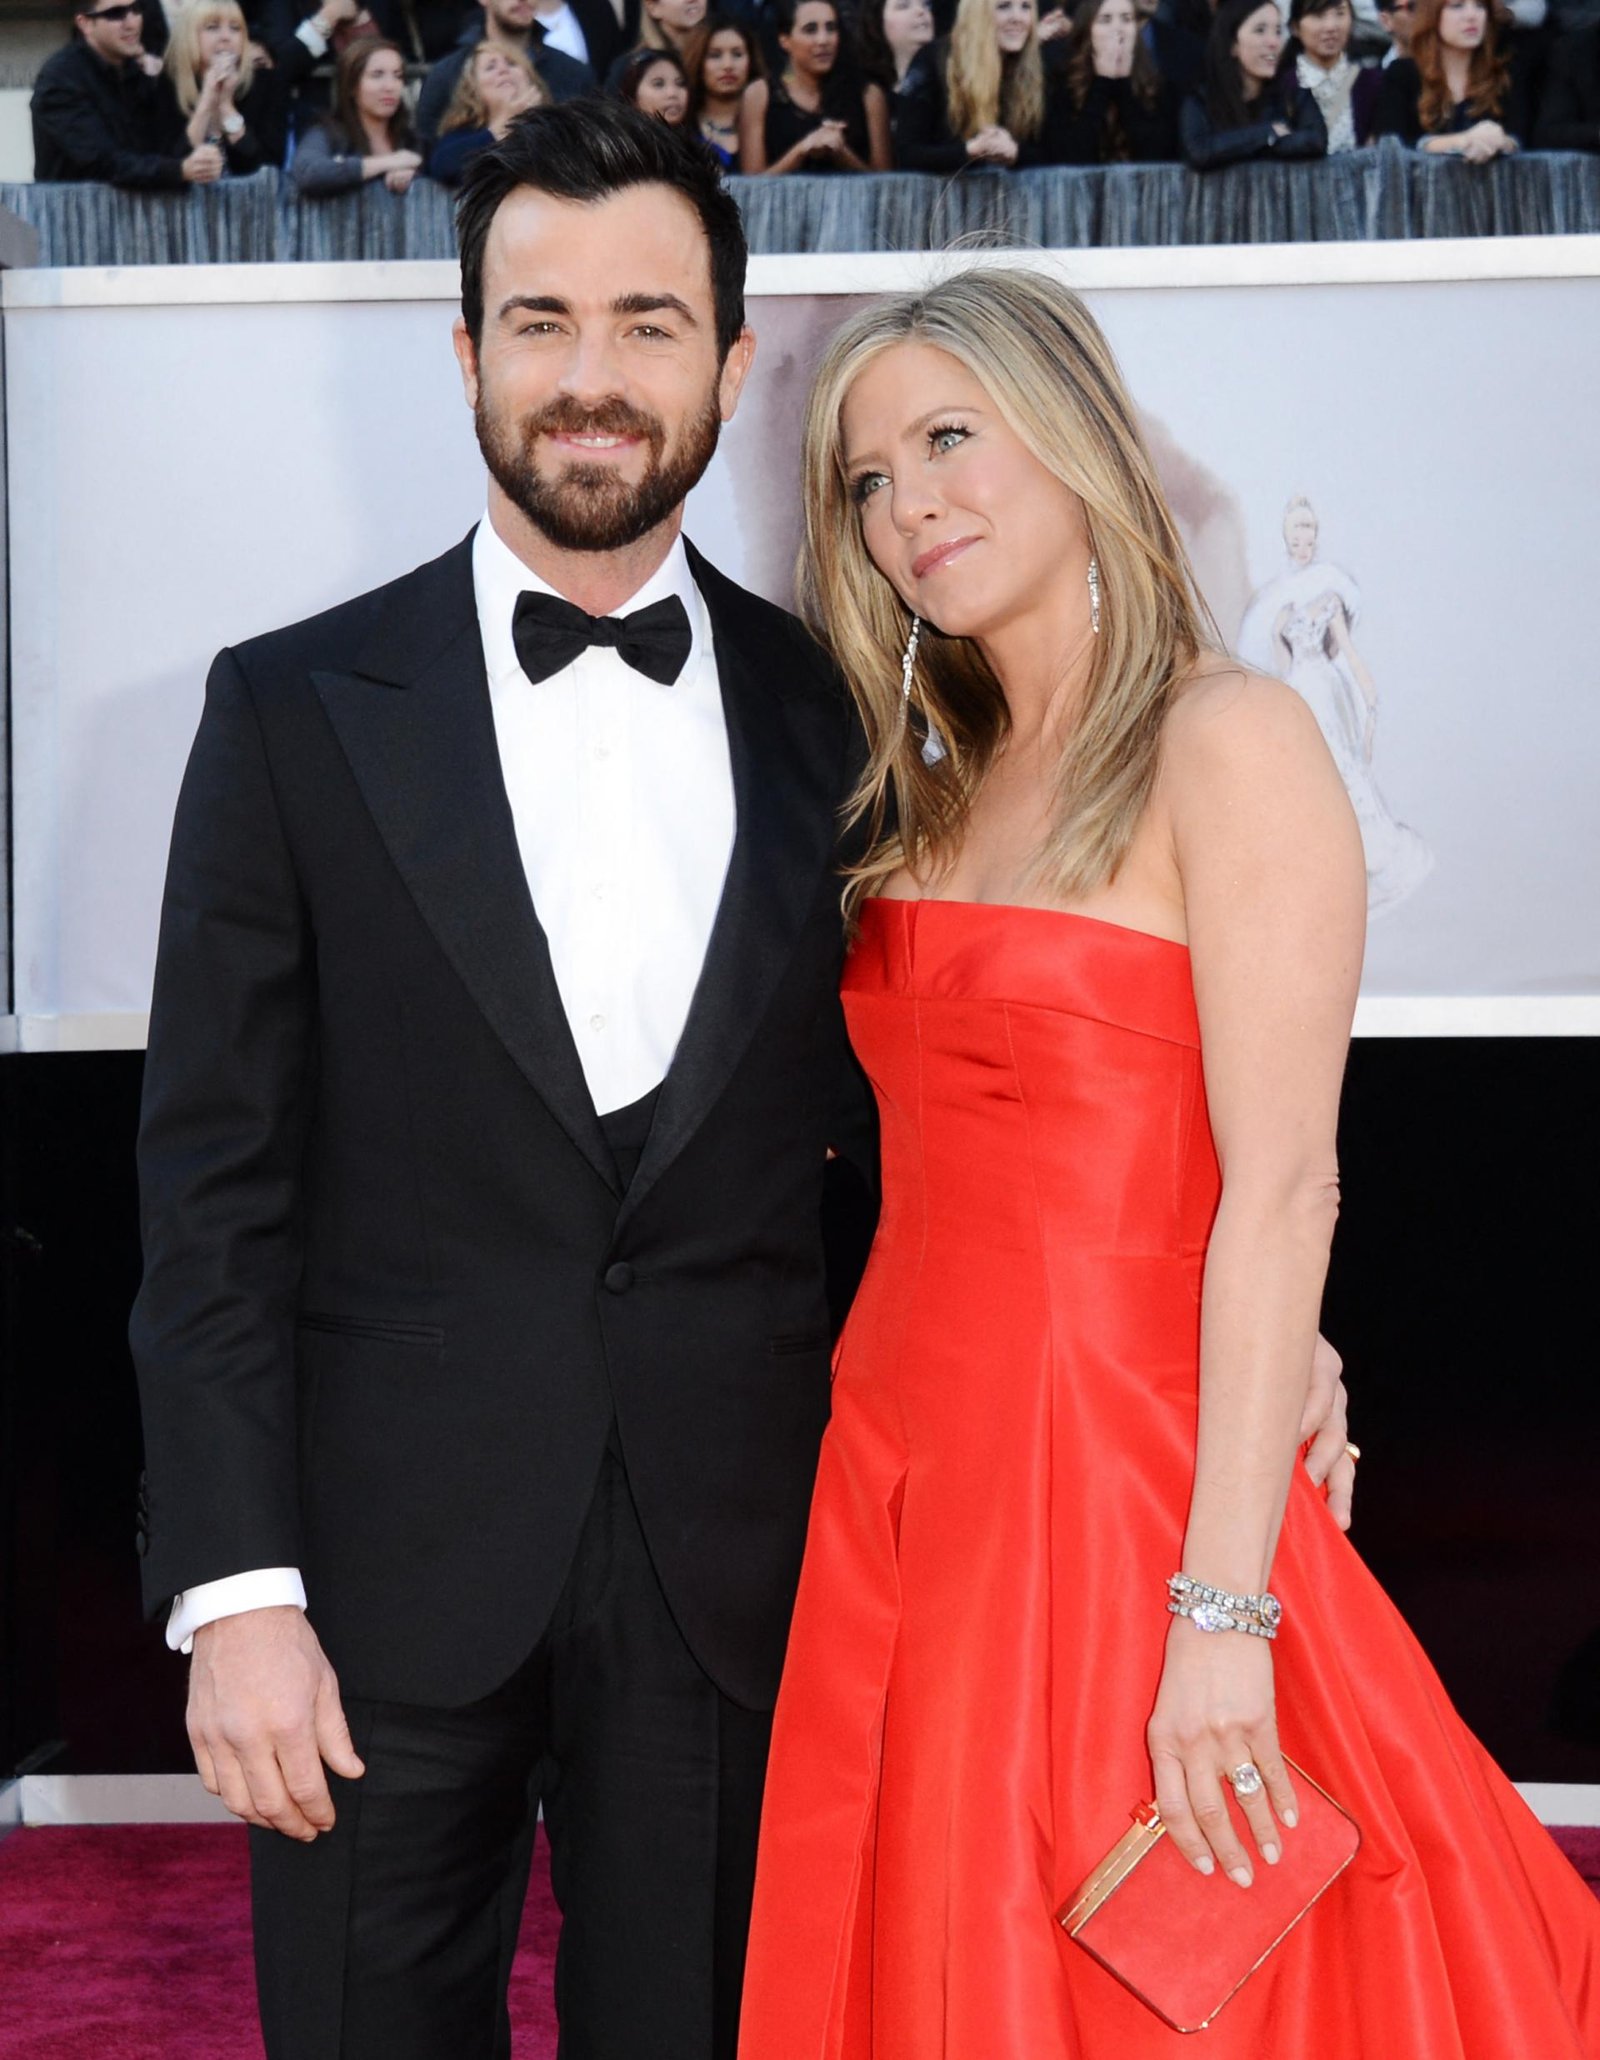 Jennifer Aniston's ex-husband Justin Theroux reveals what annoyed him most about marriage